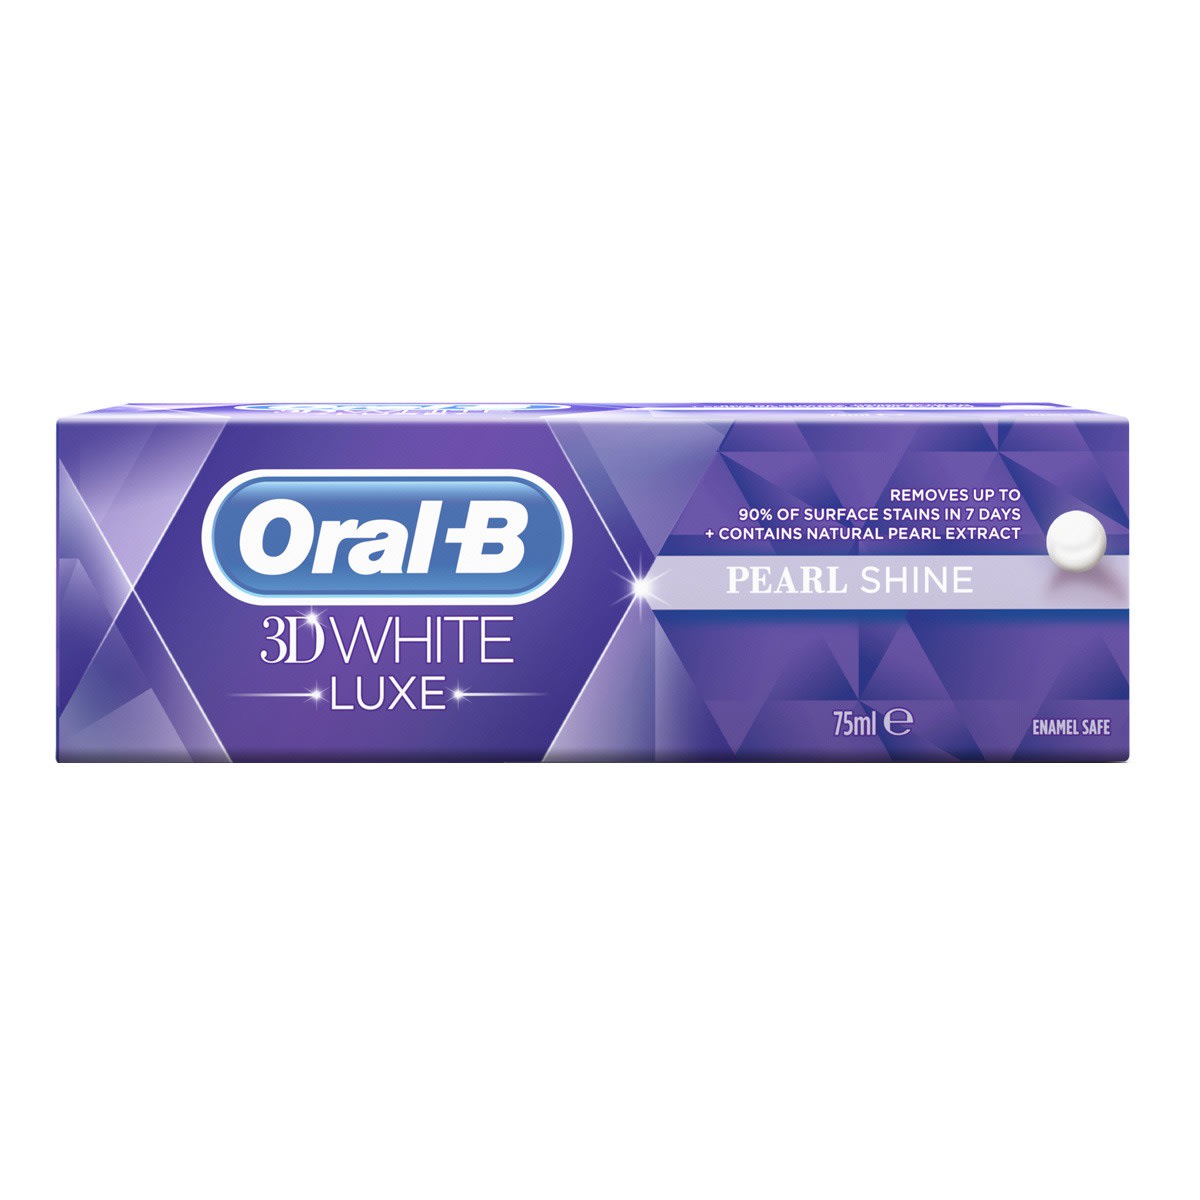 Oral-B 3D White Luxe Pearl Shine Whitening tandpasta undefined